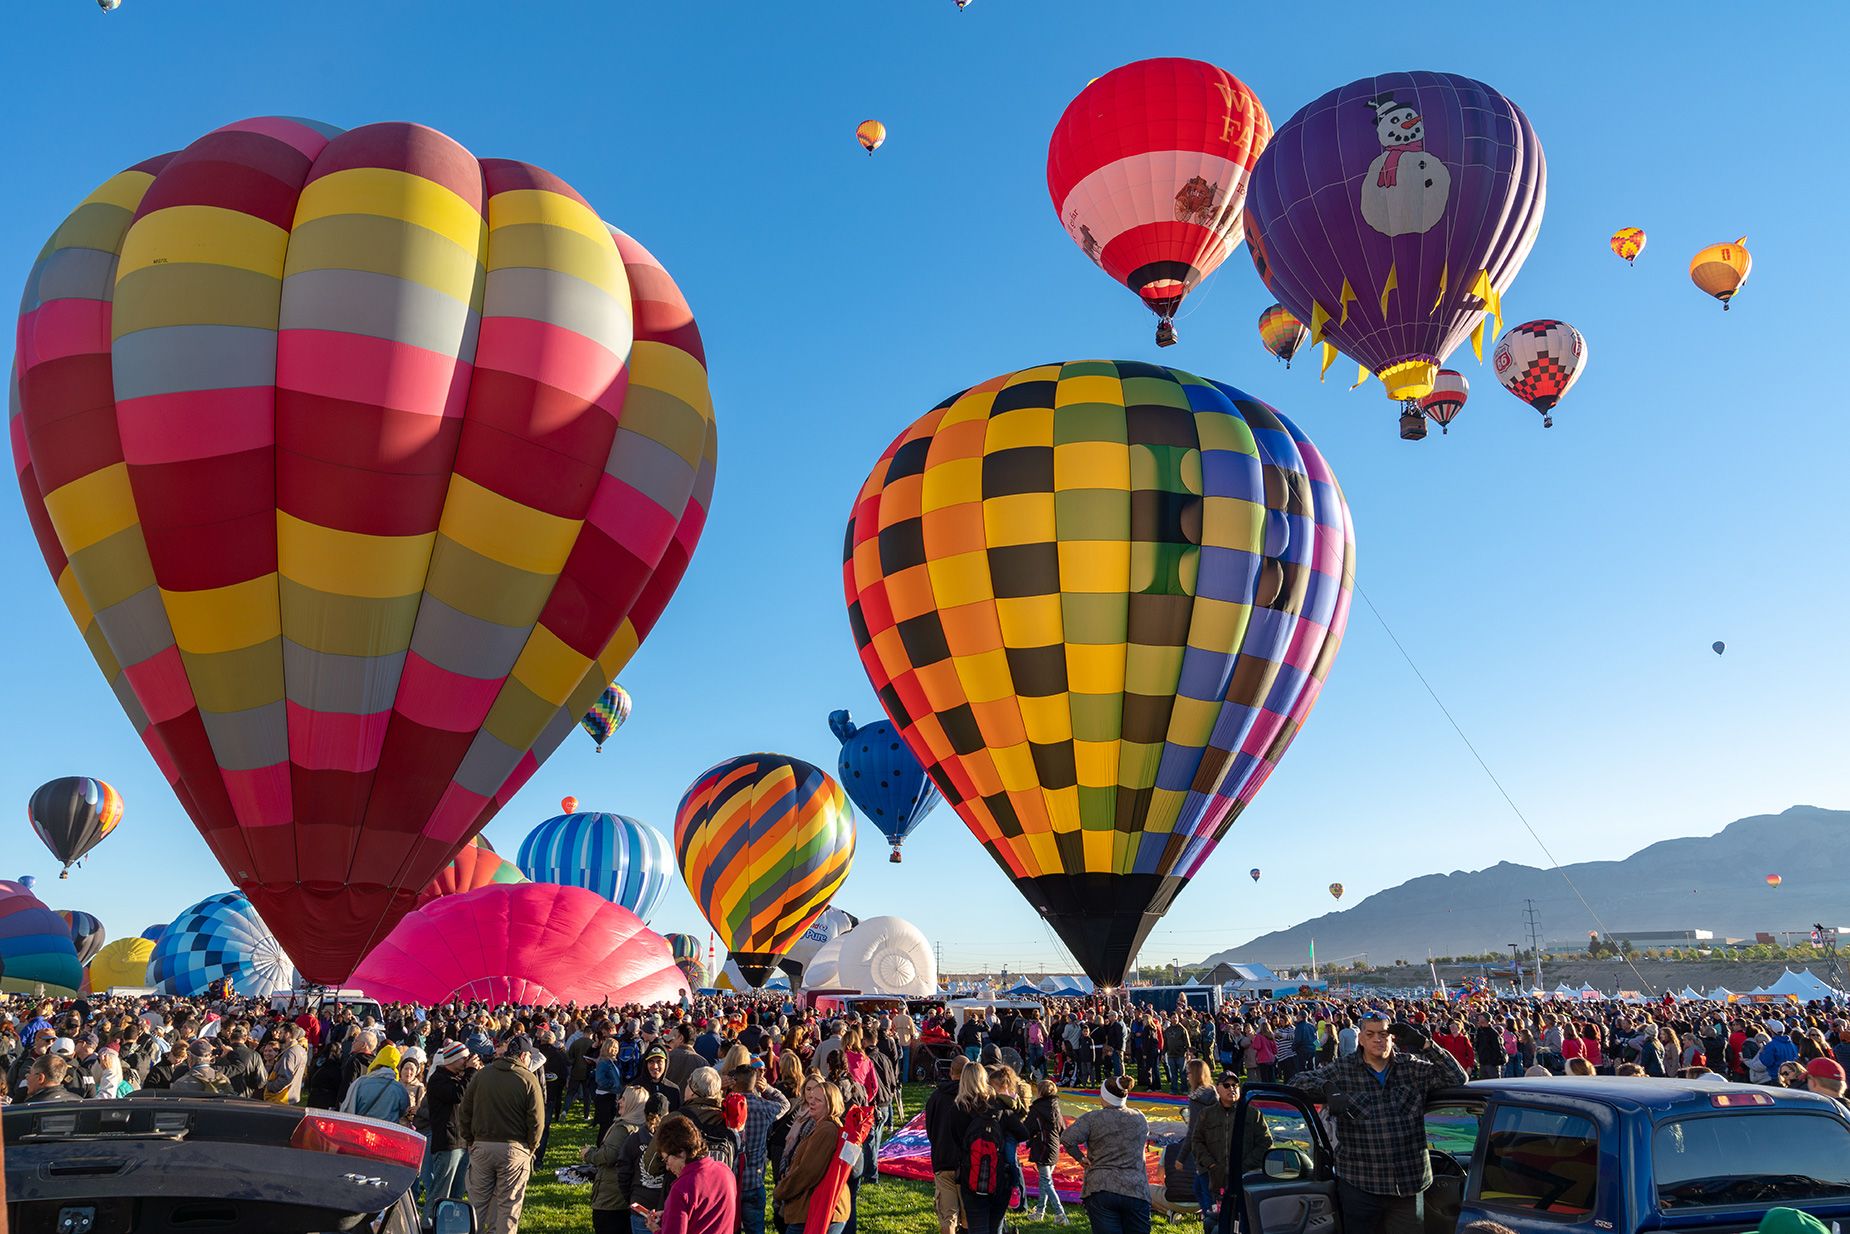 Hot Air Balloon Festival in Albuquerque. Photo taken during a cold October morning when there are hundreds of balloons ascending shortly after dawn.